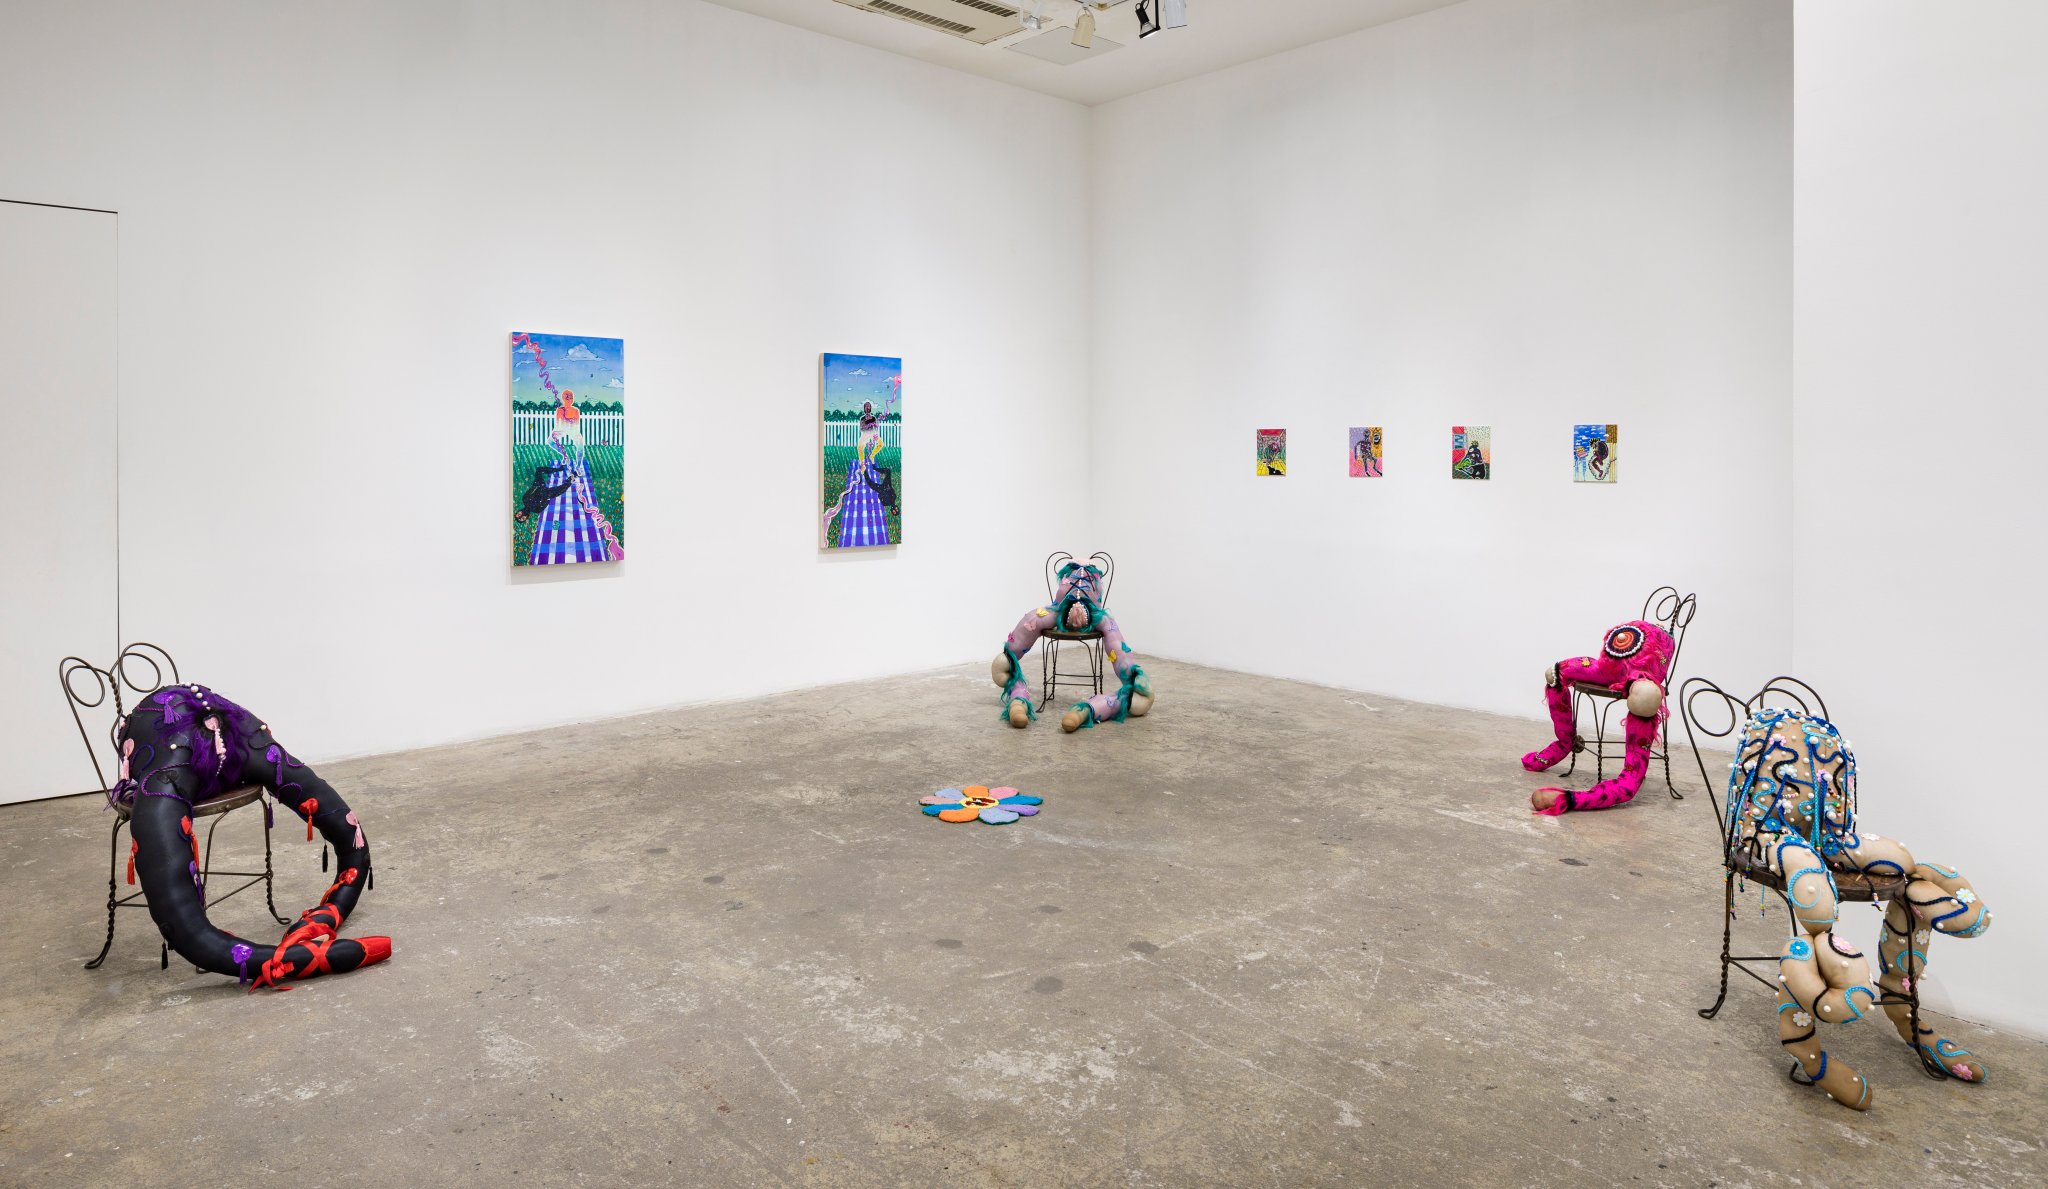 An installation photograph of abstract sculptures and paintings in a sparse gallery. Four small and two large colorful paintings hang on the walls. Four anthropomorphic soft sculptures are each seated on garden chairs, and their lanky and lumpy limbs are adorned with pearls, sparkles, colorful braids, and ribbons. A sculpture of a flower rests in the middle of the floor.